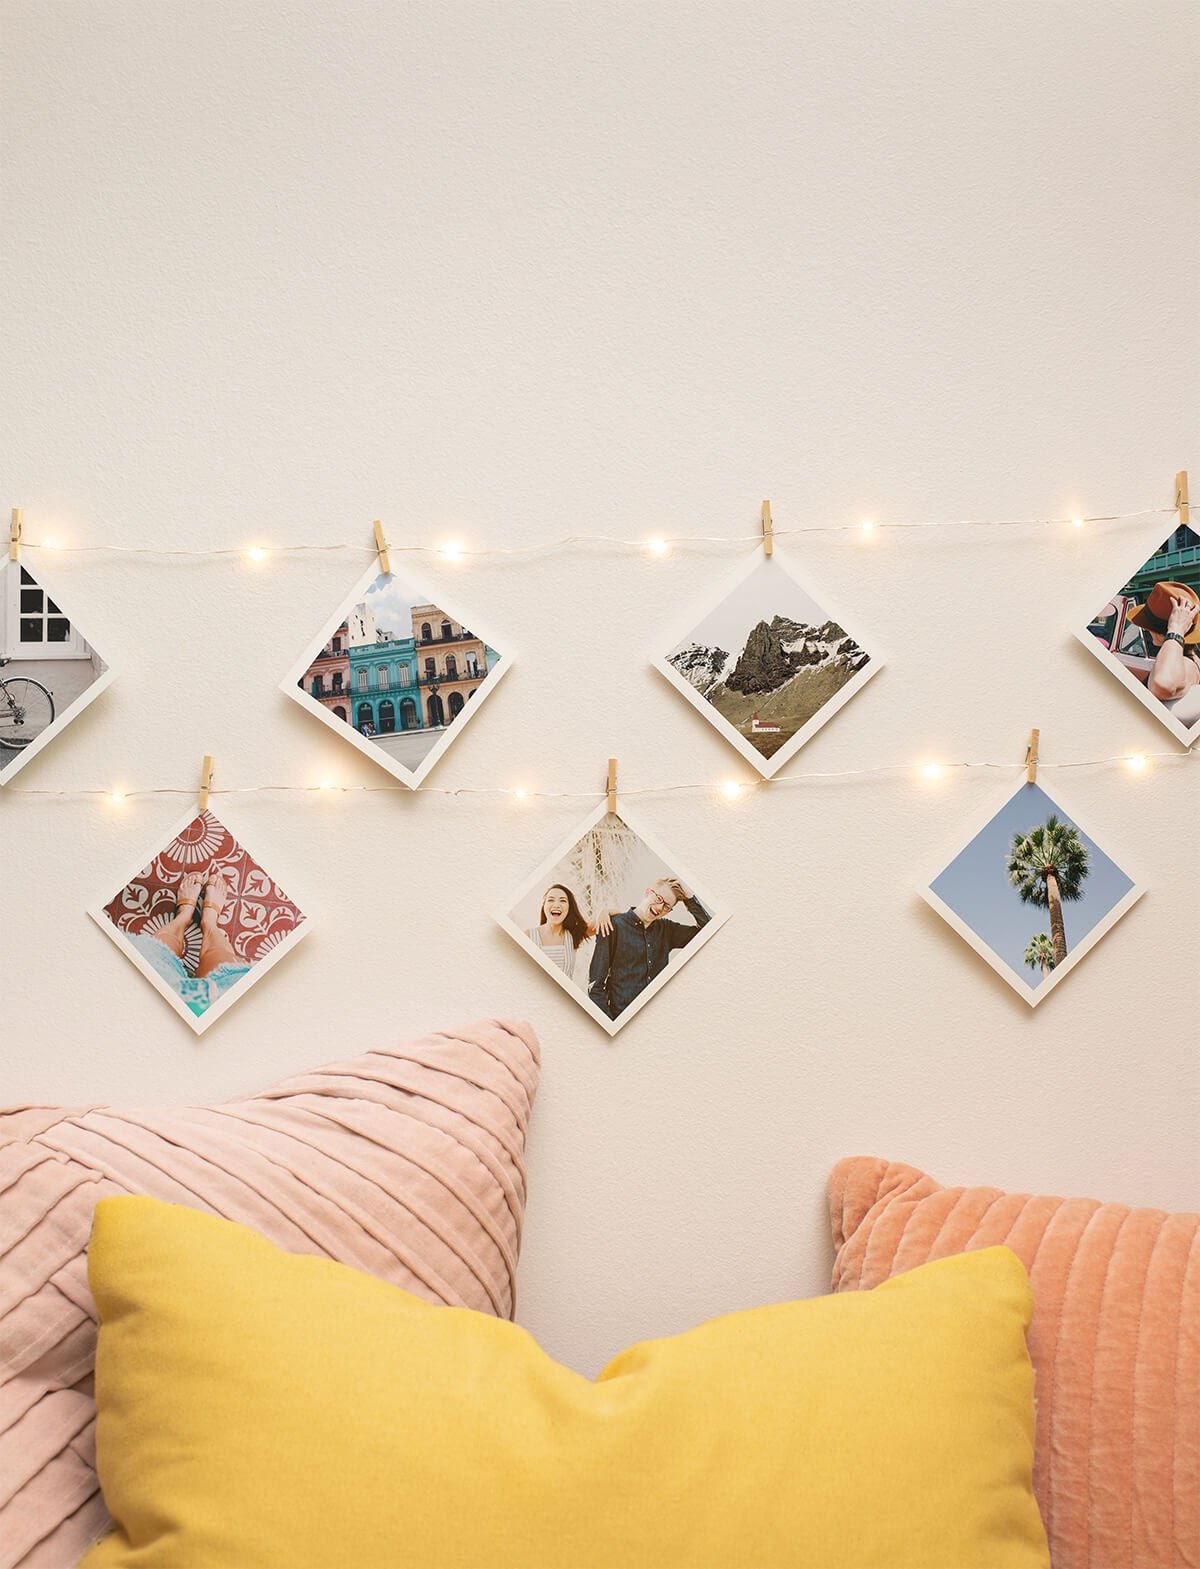 Diagonally rotated square prints hanging from lit up string lights